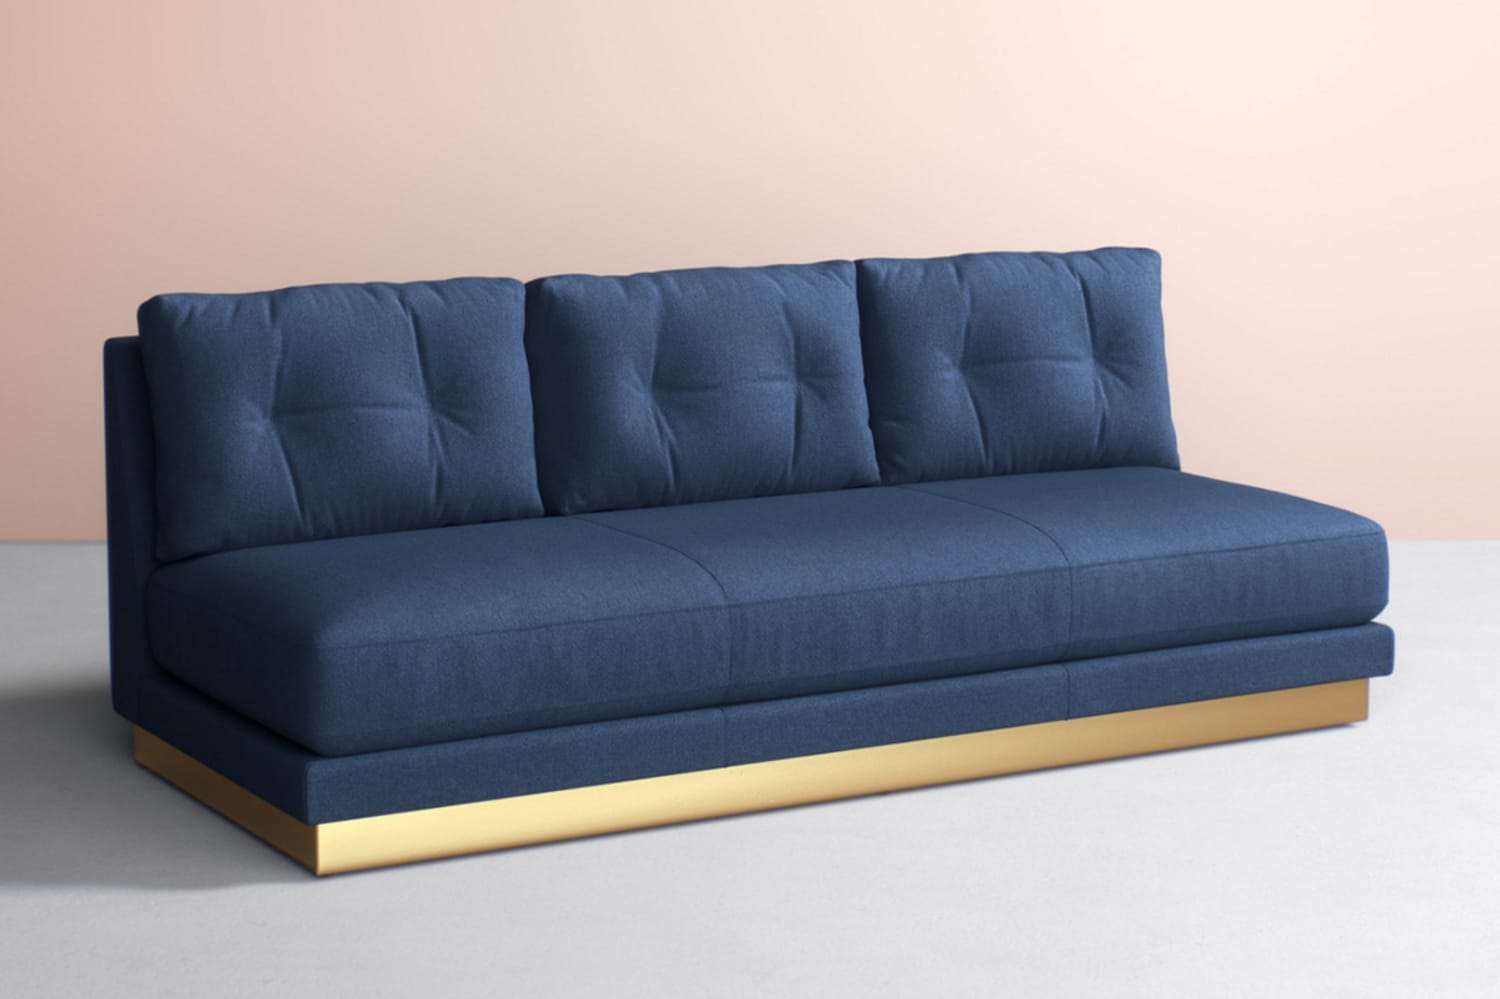 The Sofa Color That Works With (Just About) Any Decor